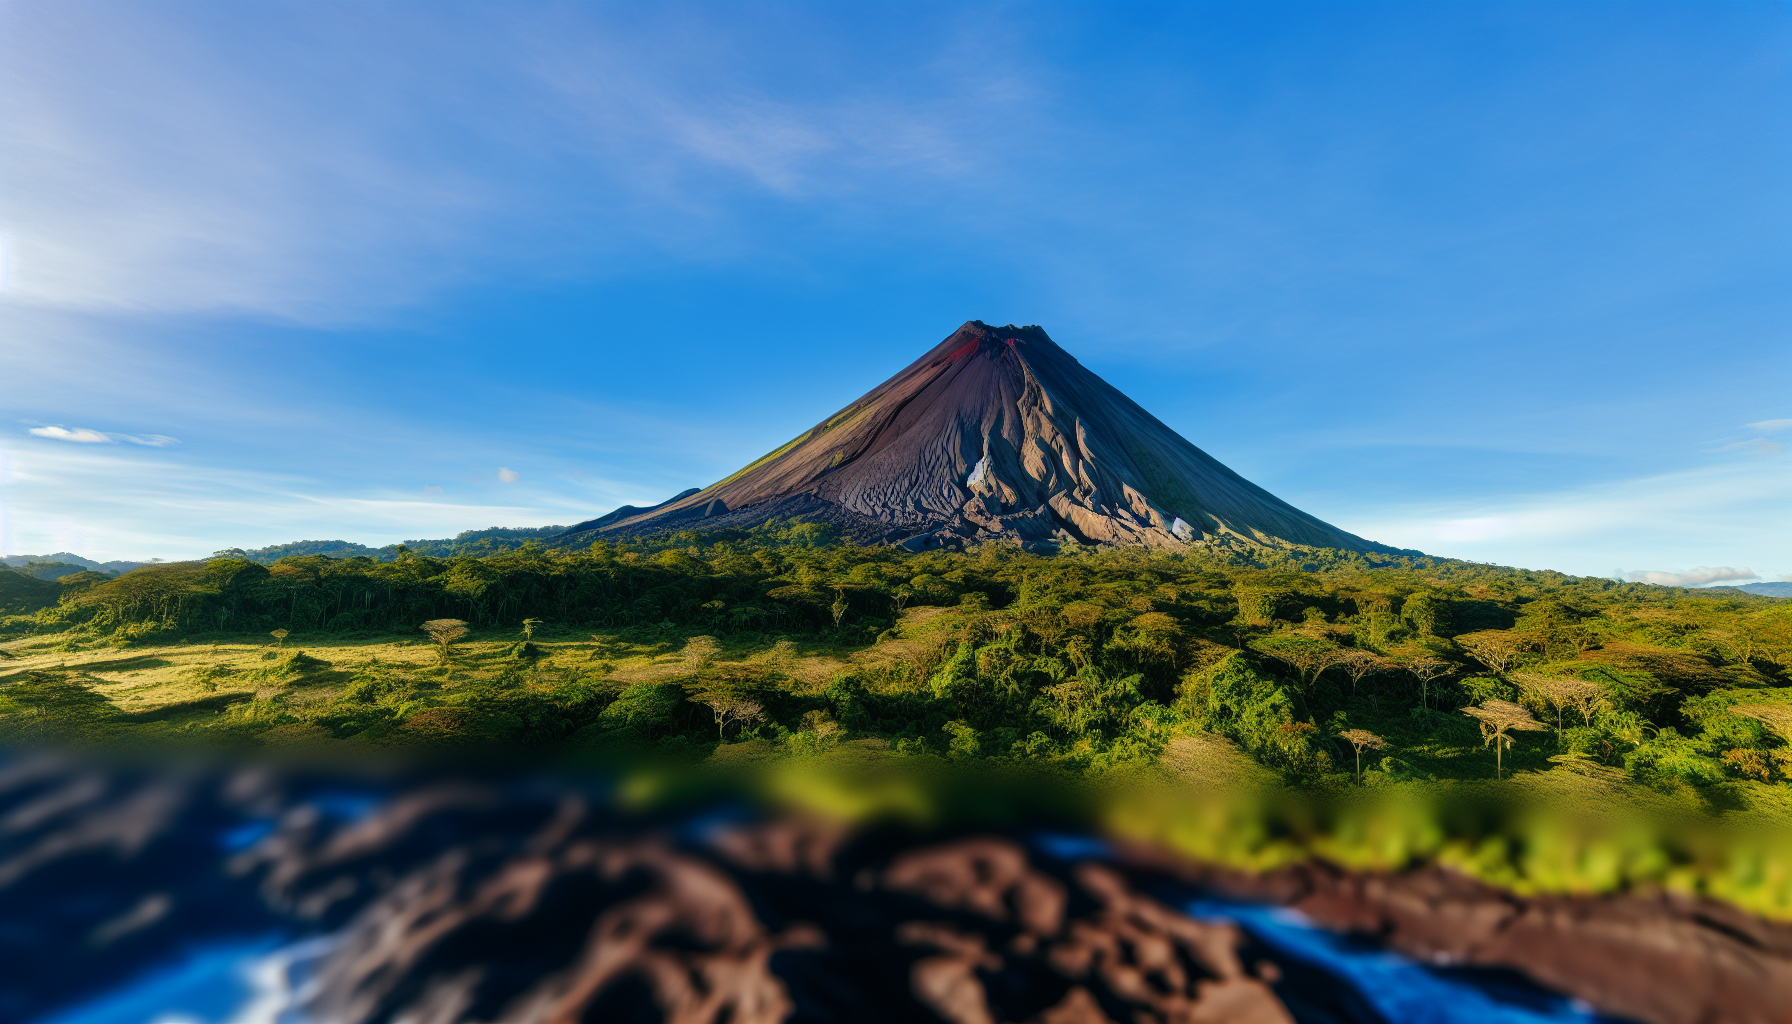 Arenal Volcano in Costa Rica during the dry season